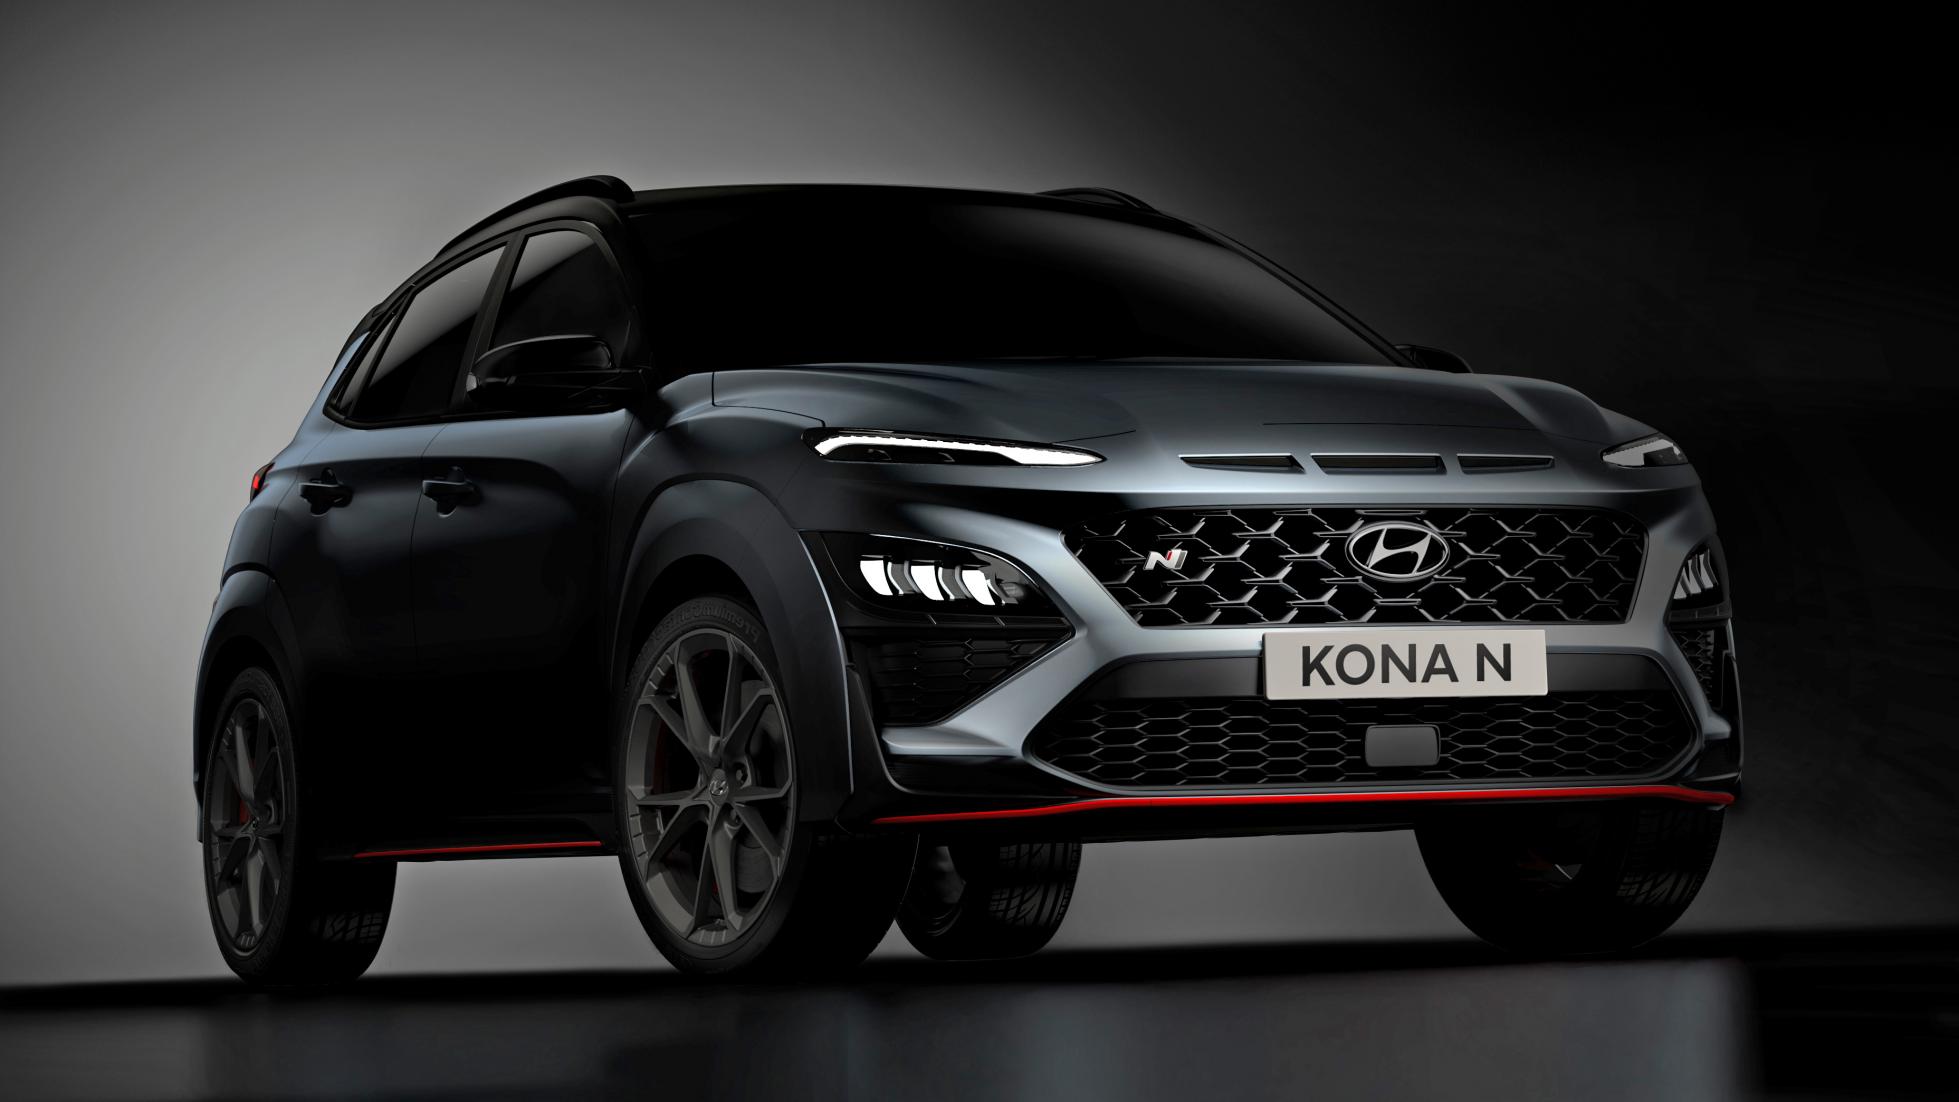 It's our first proper look at the Hyundai Kona N